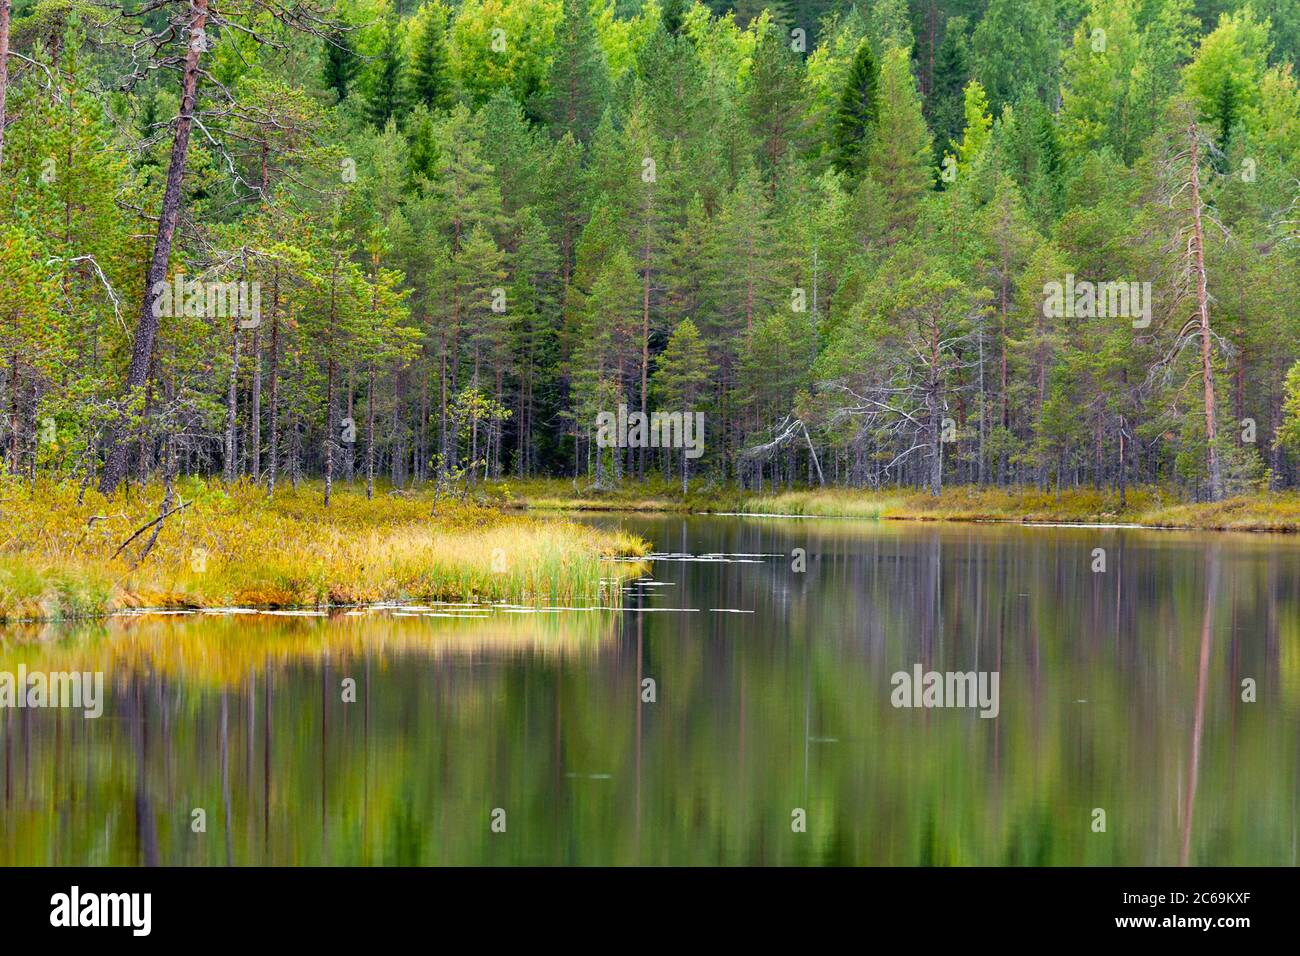 Pine trees in taiga forest around a tranquil lake in northern Finland, Finland Stock Photo